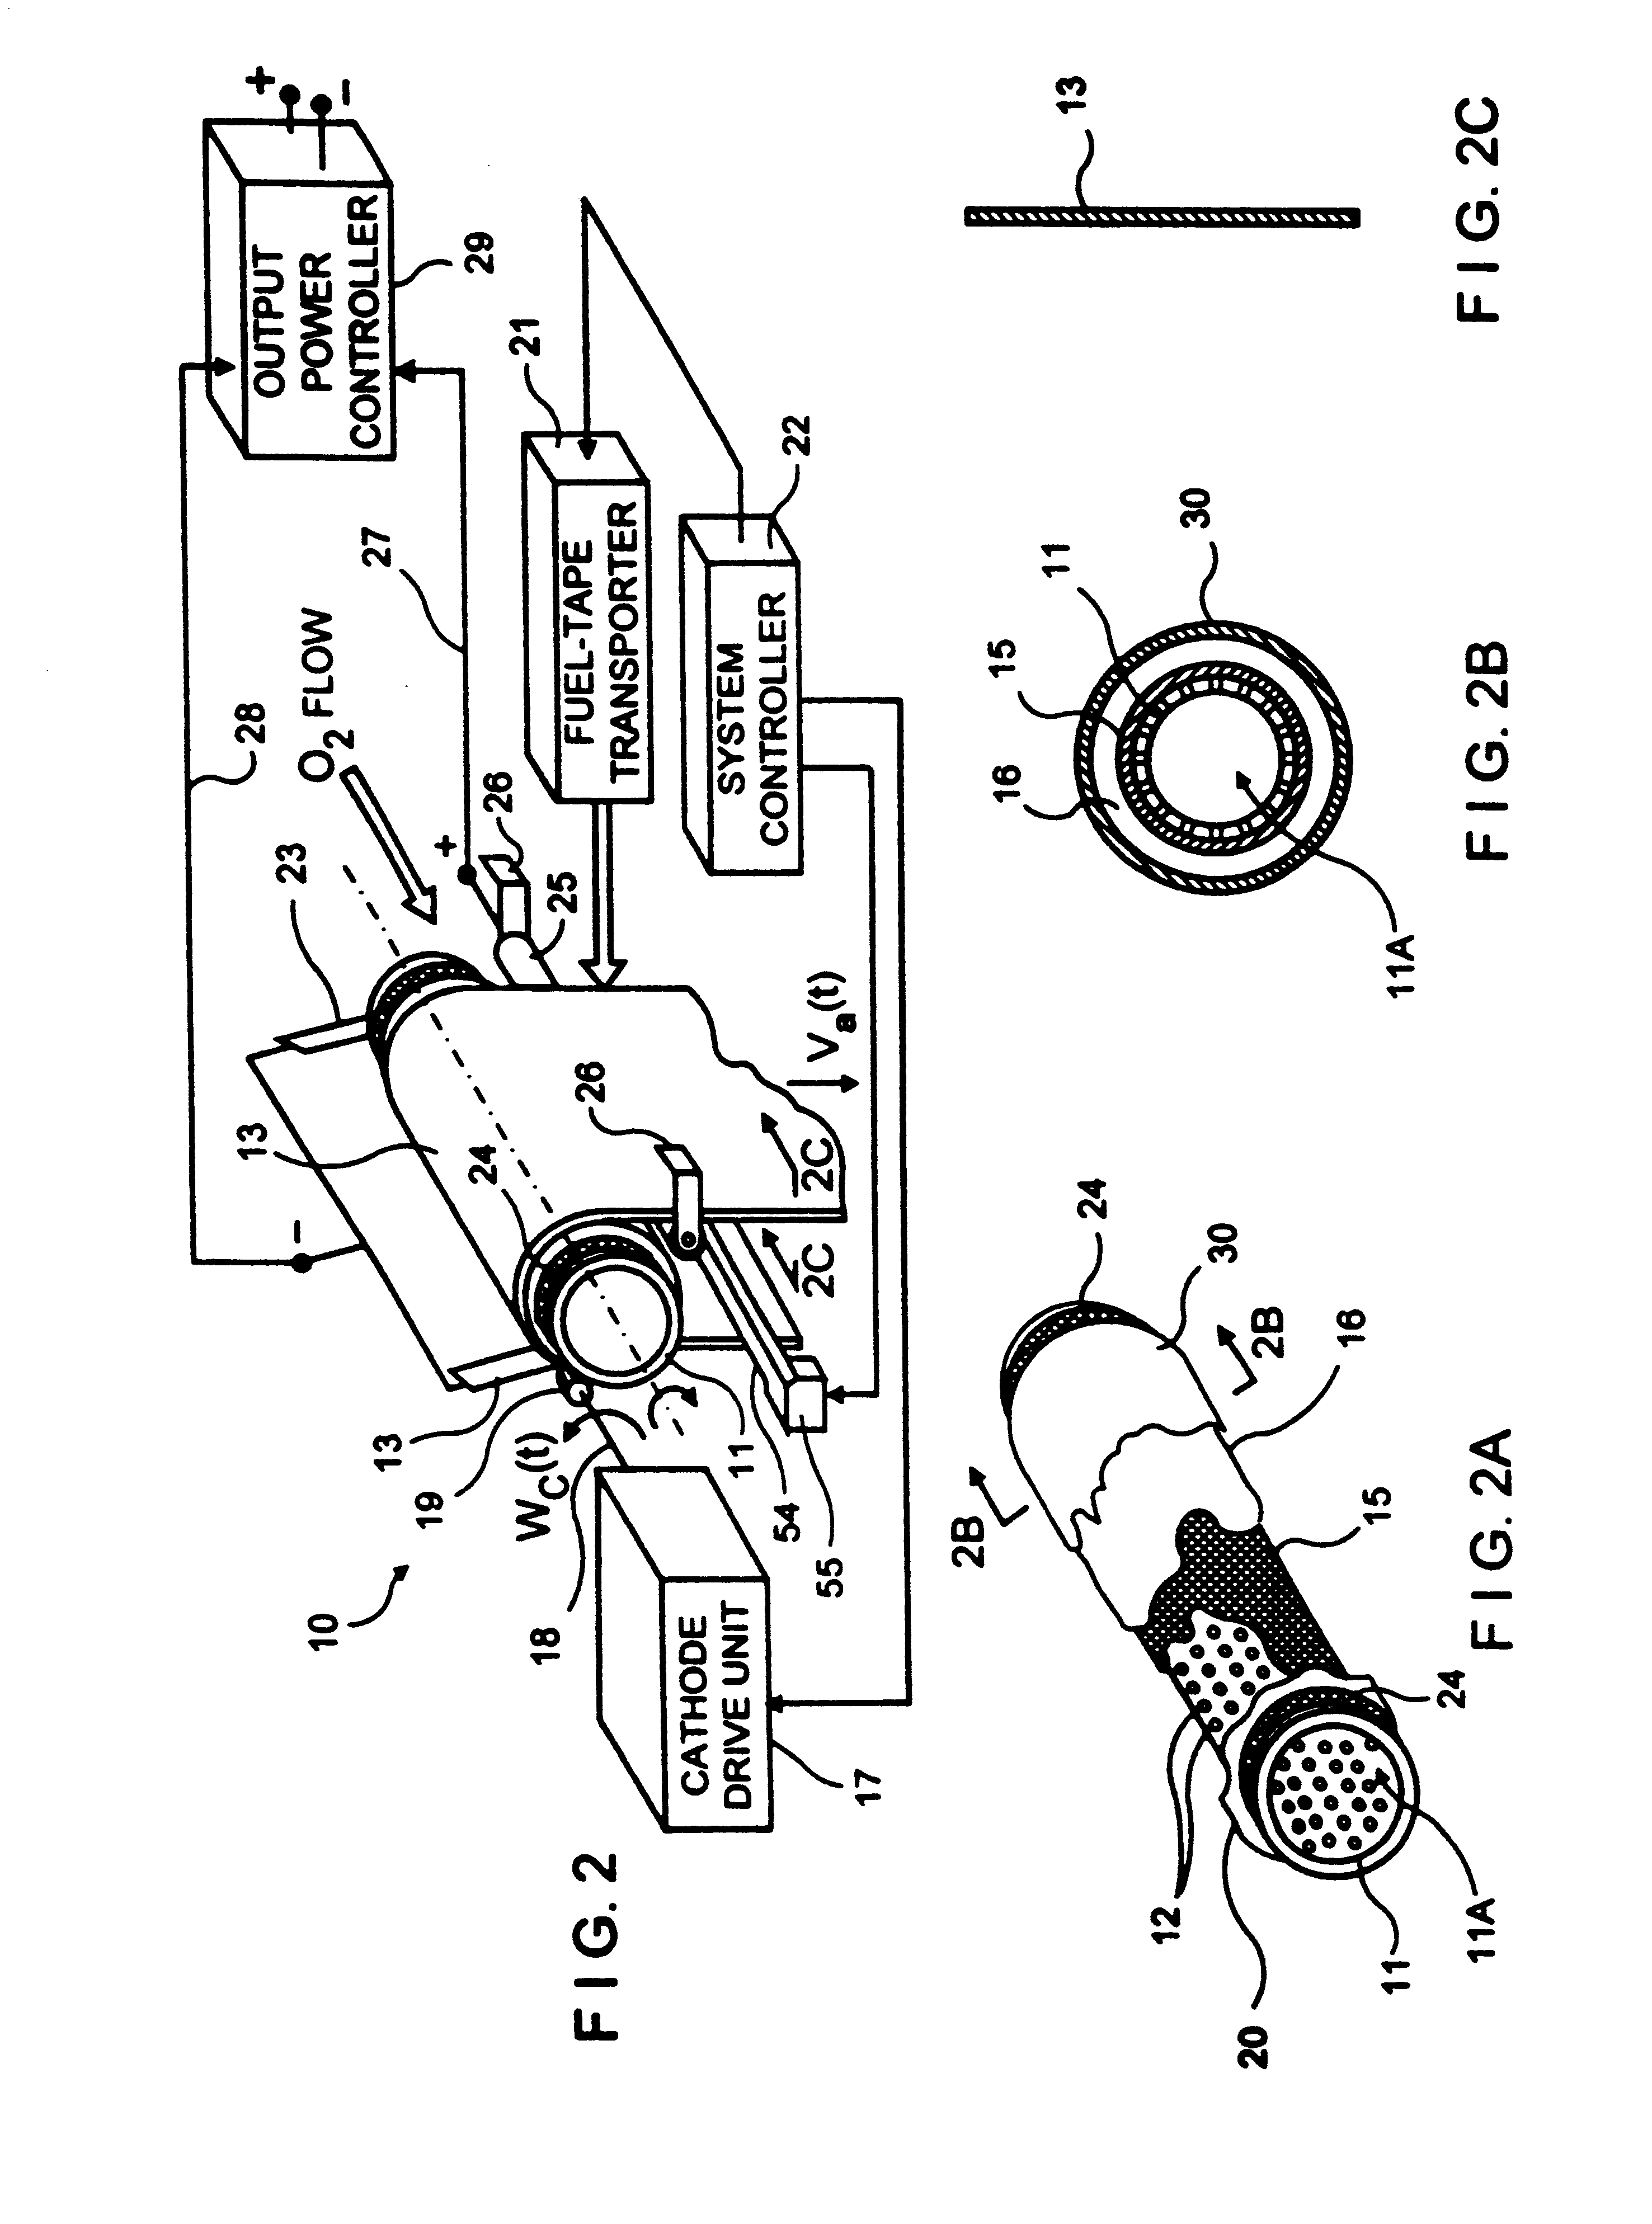 Cathode cylinder for use in metal-air fuel cell battery systems and method of fabricating the same